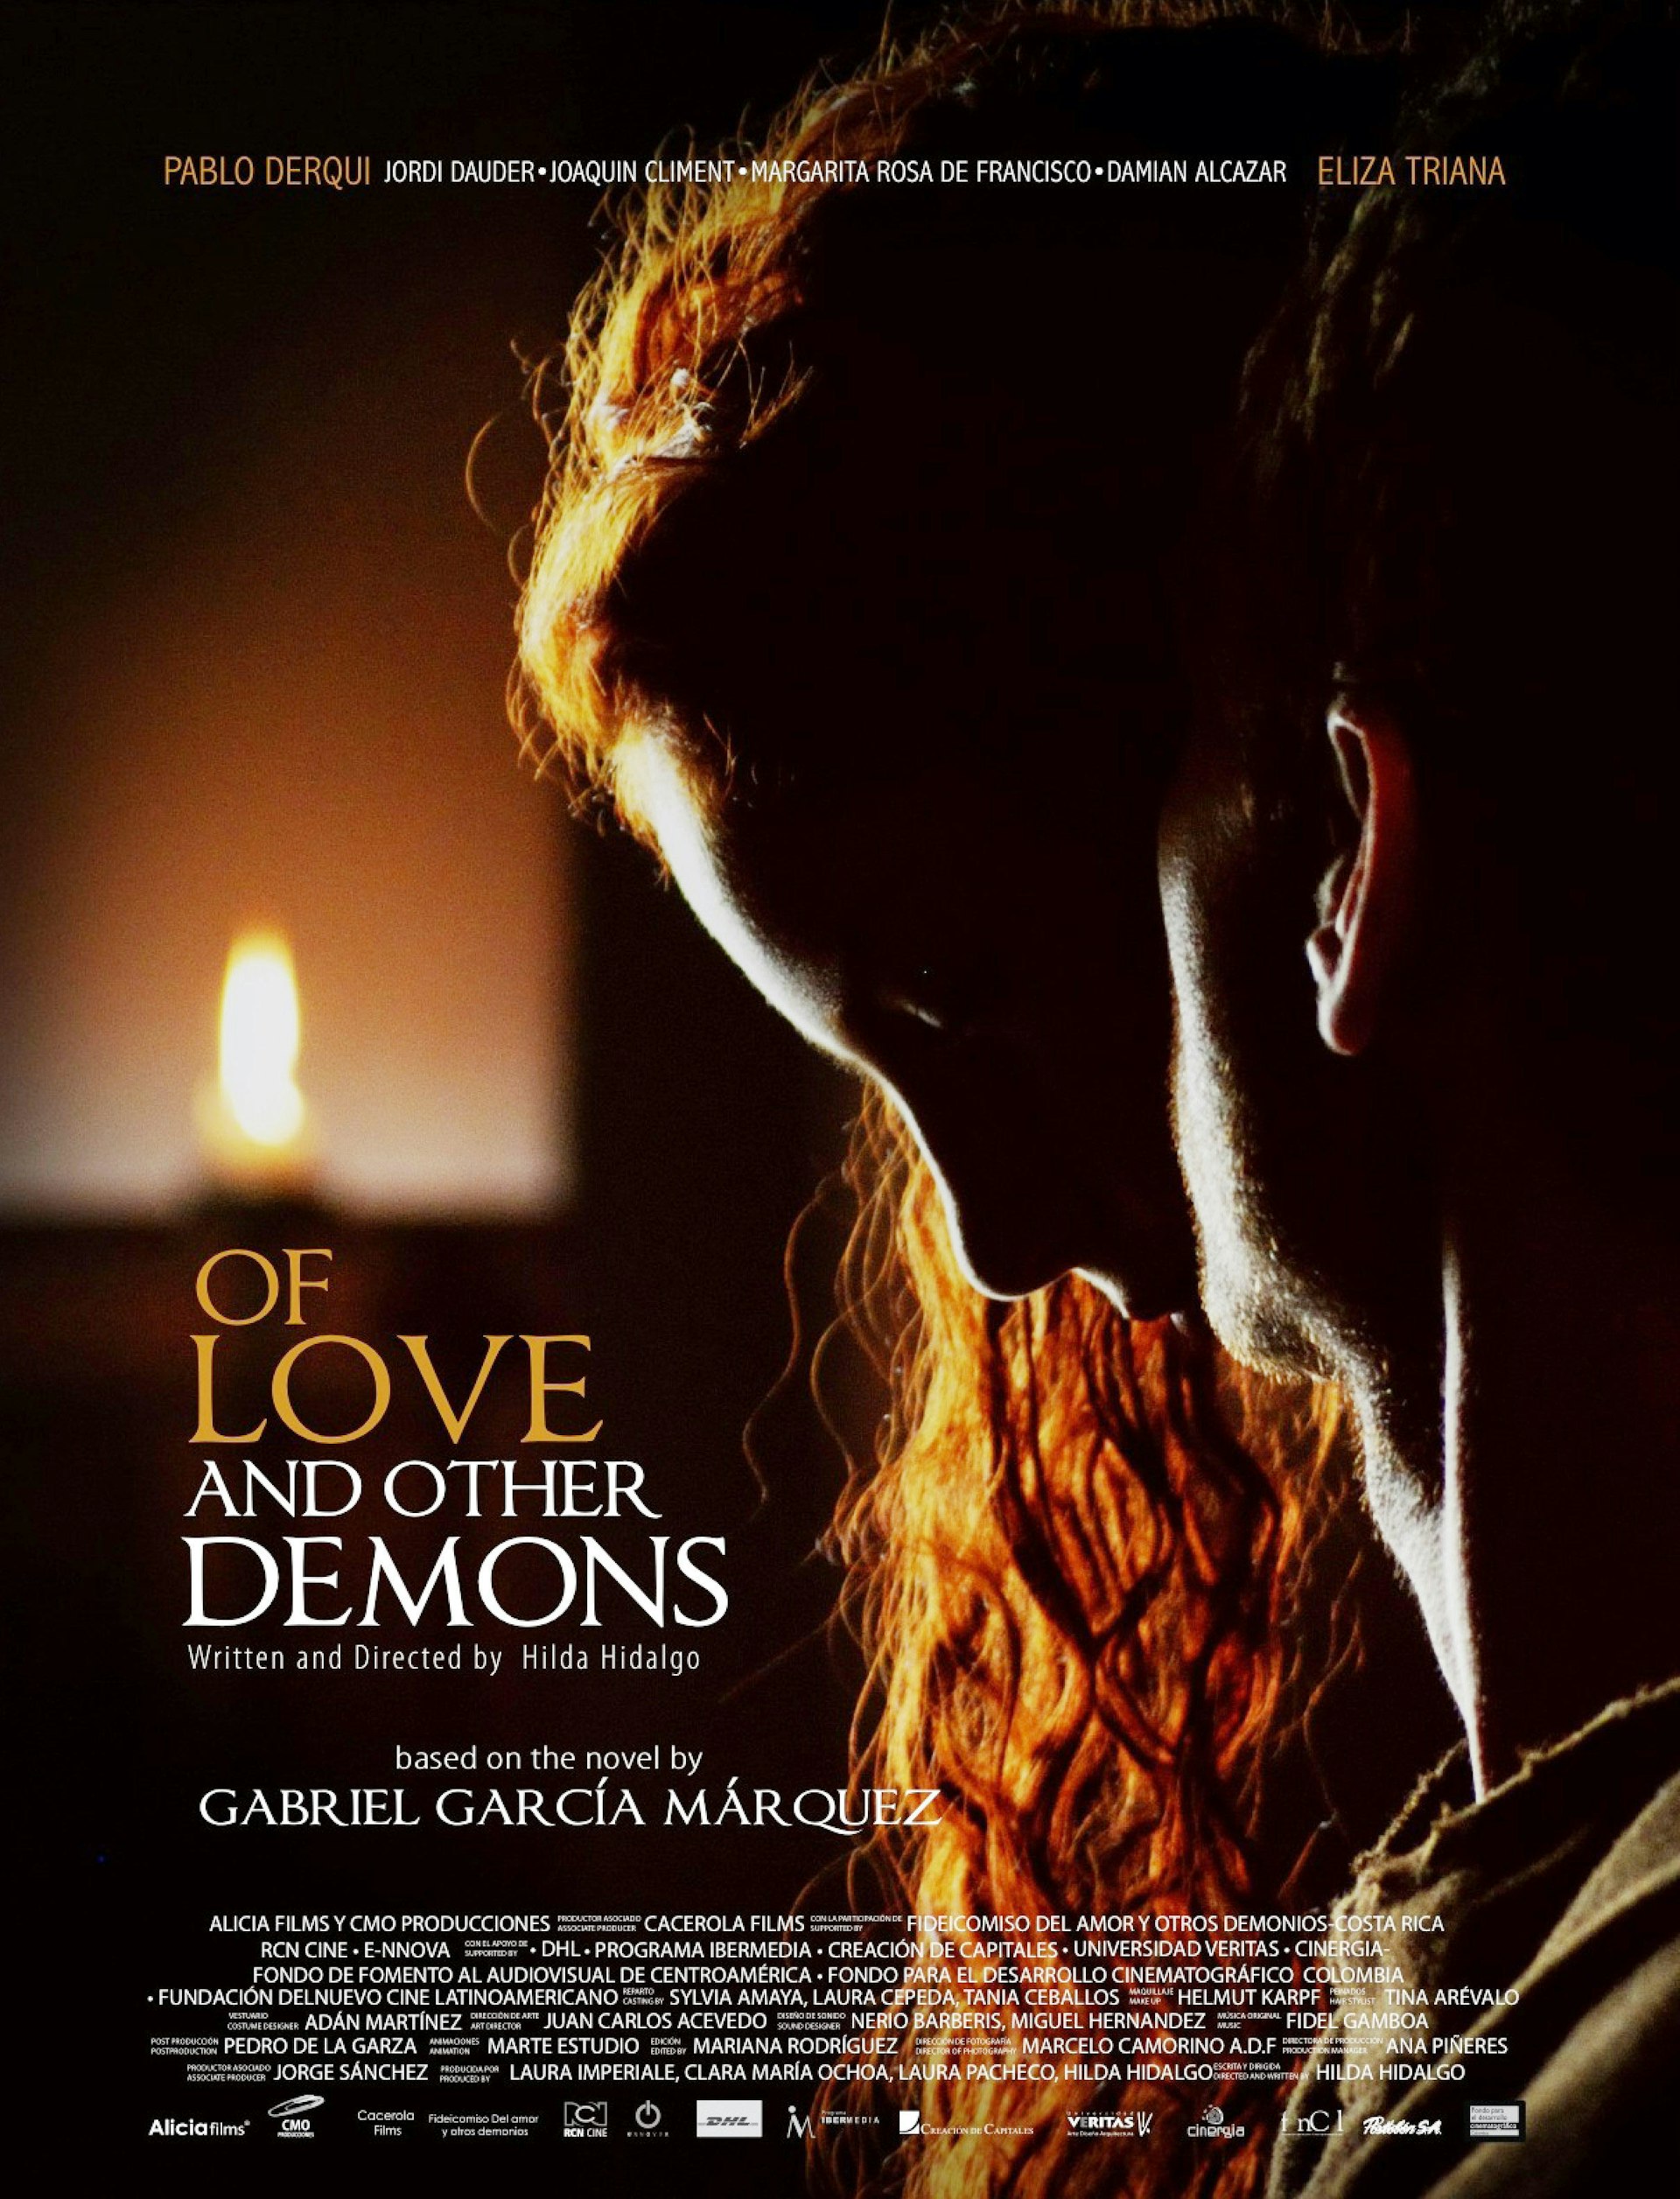 Poster from the movie 'Of Love and Other Demons" depicting a man seemingly kissing the cheek of a young woman with red hair. 